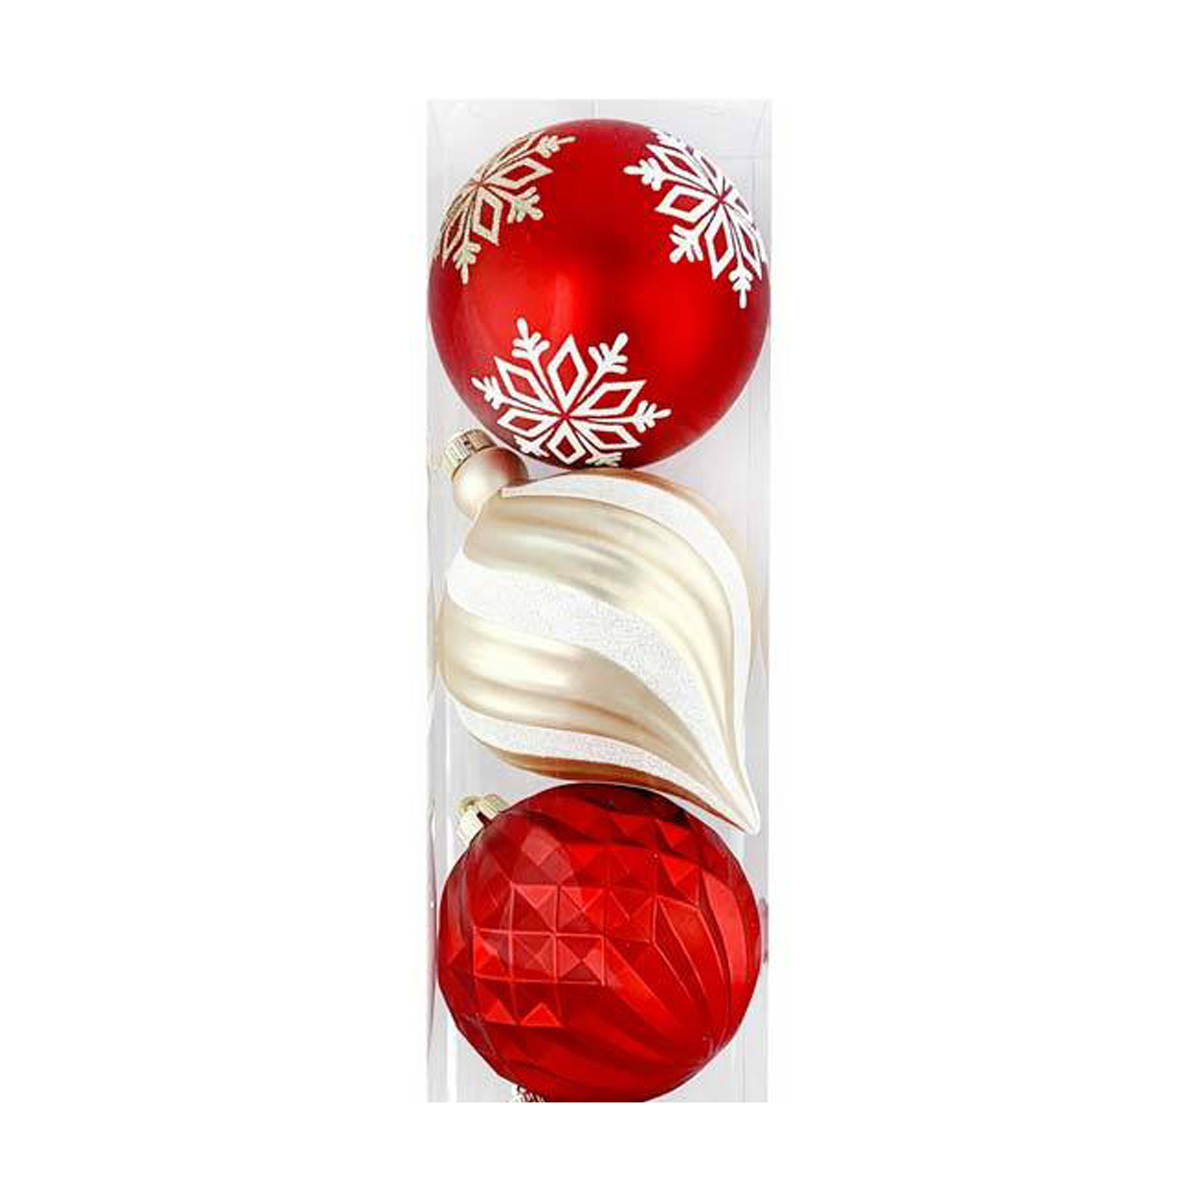 6 Inch (15cm) Shatter-Resistant Christmas Ornaments Set of 6 in Red And Gold